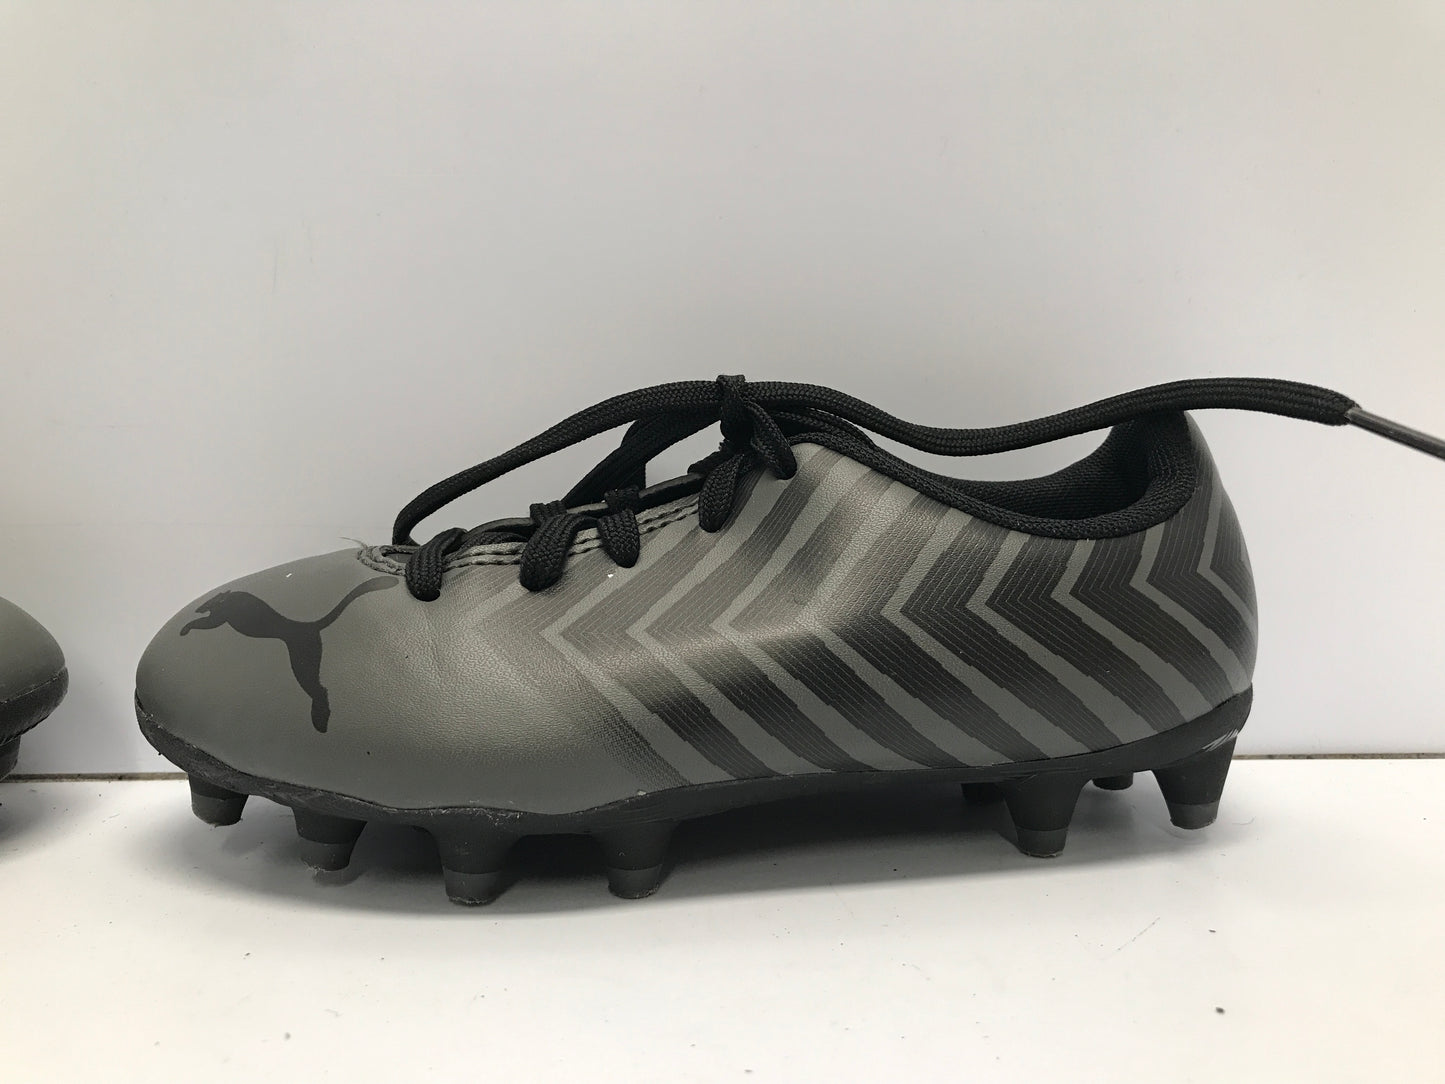 Soccer Shoes Cleats Child Size 12 Puma Black Grey Like New